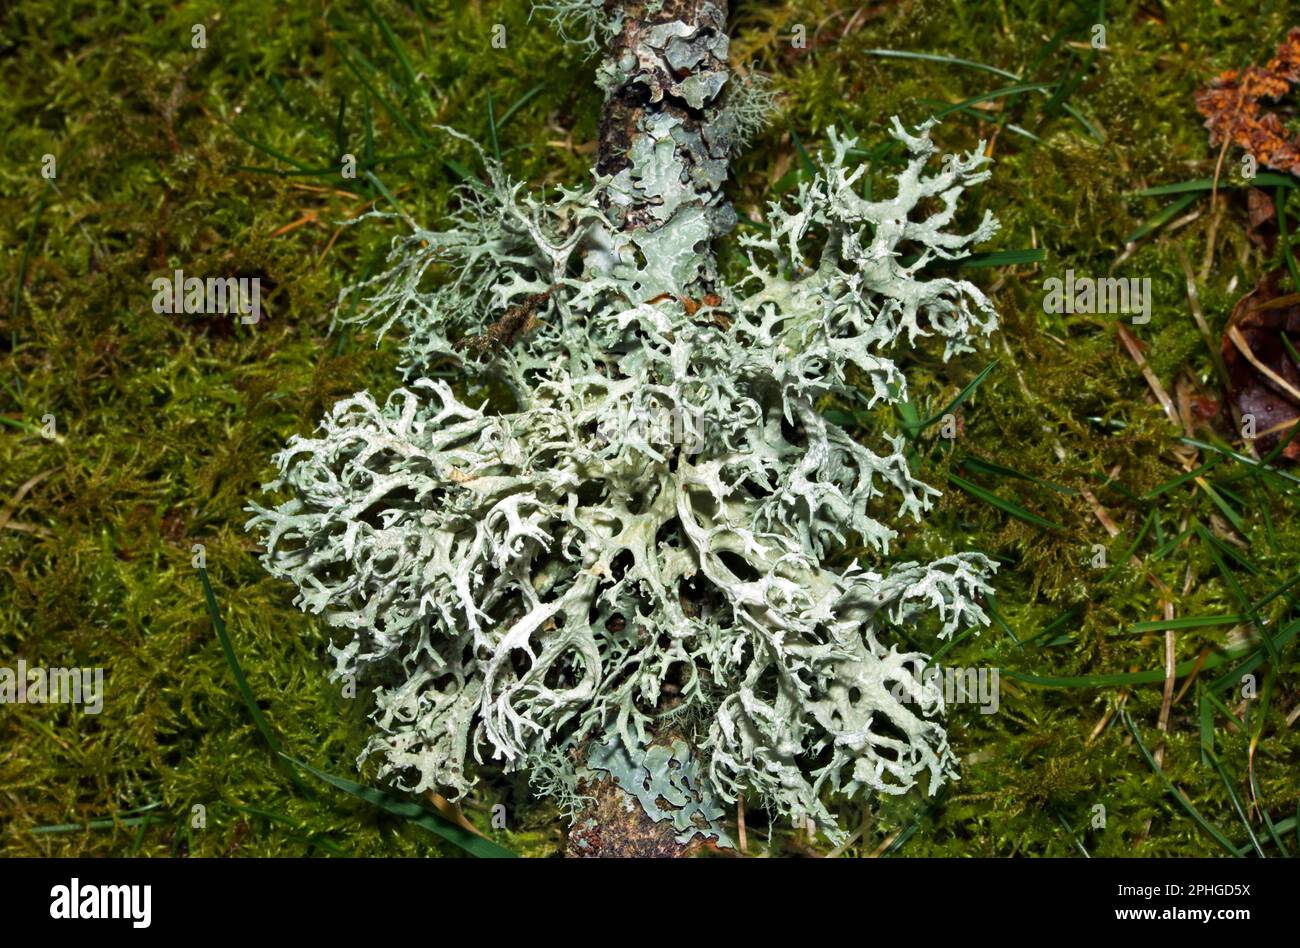 Evernia prunastri (oakmoss) grows primarily on oak trees. It occurs in mountainous temperate forests throughout the Northern Hemisphere. Stock Photo